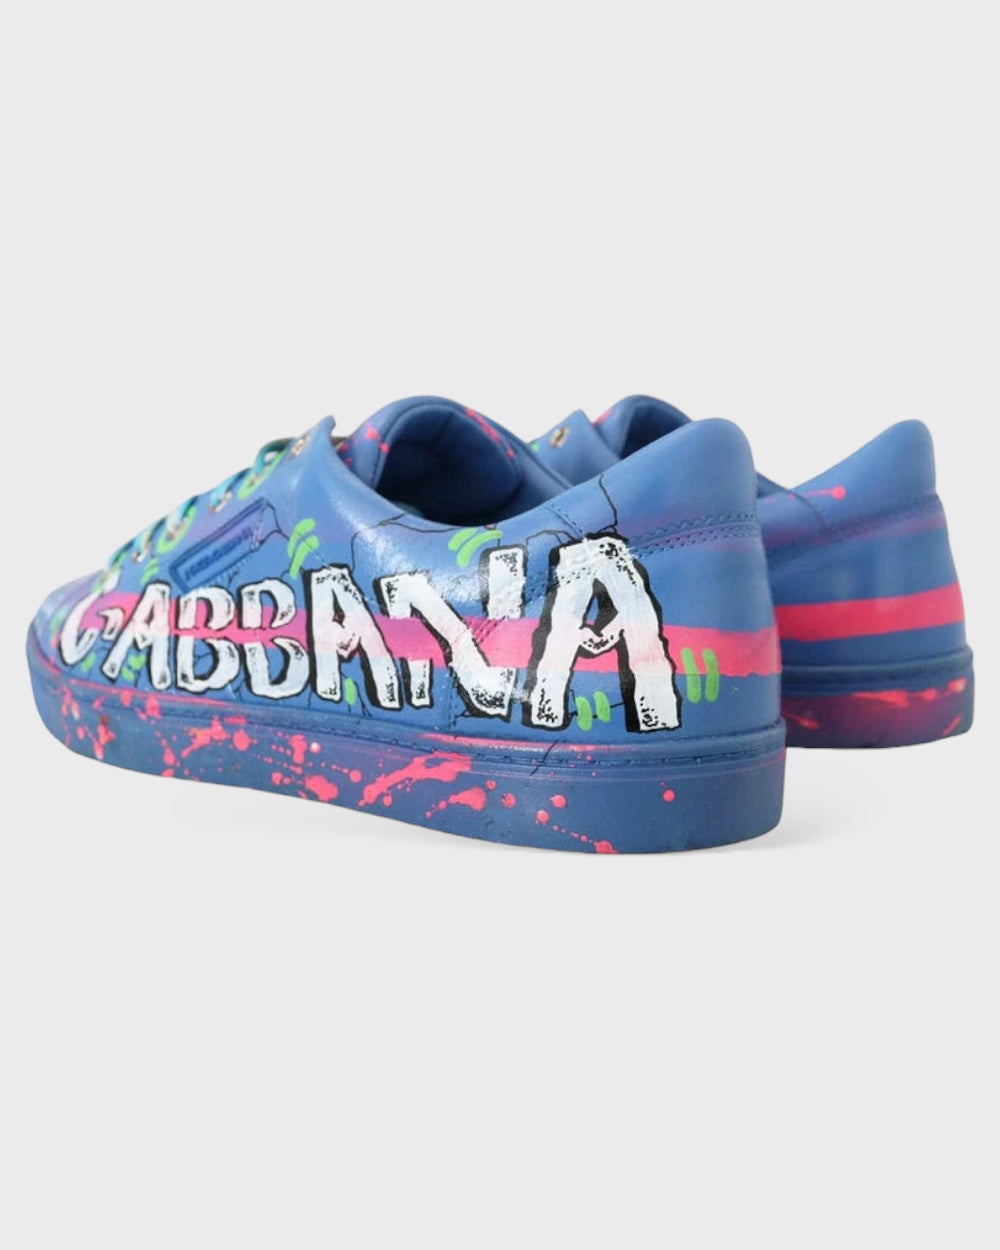 Dolce & Gabbana Blue Leather Sneakers Casual Handpainted Shoes